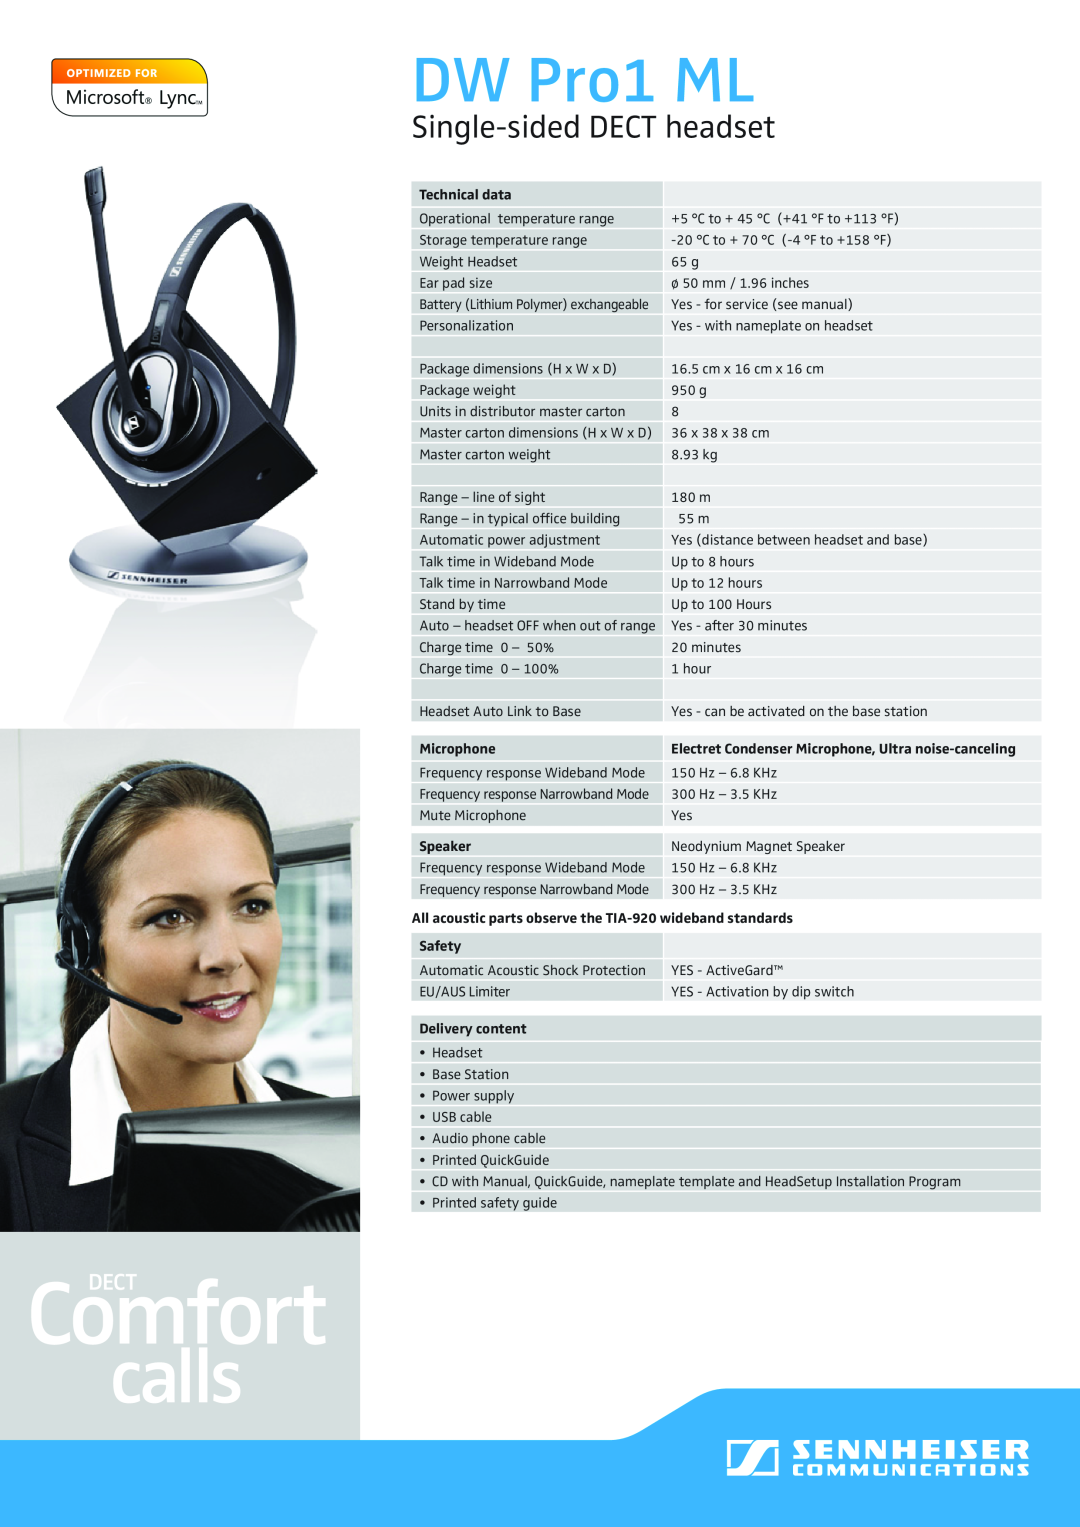 Sennheiser 504460 DW Pro1 ML, Single-sidedDECT headset, Technical data, Microphone, Speaker, Safety, Delivery content 